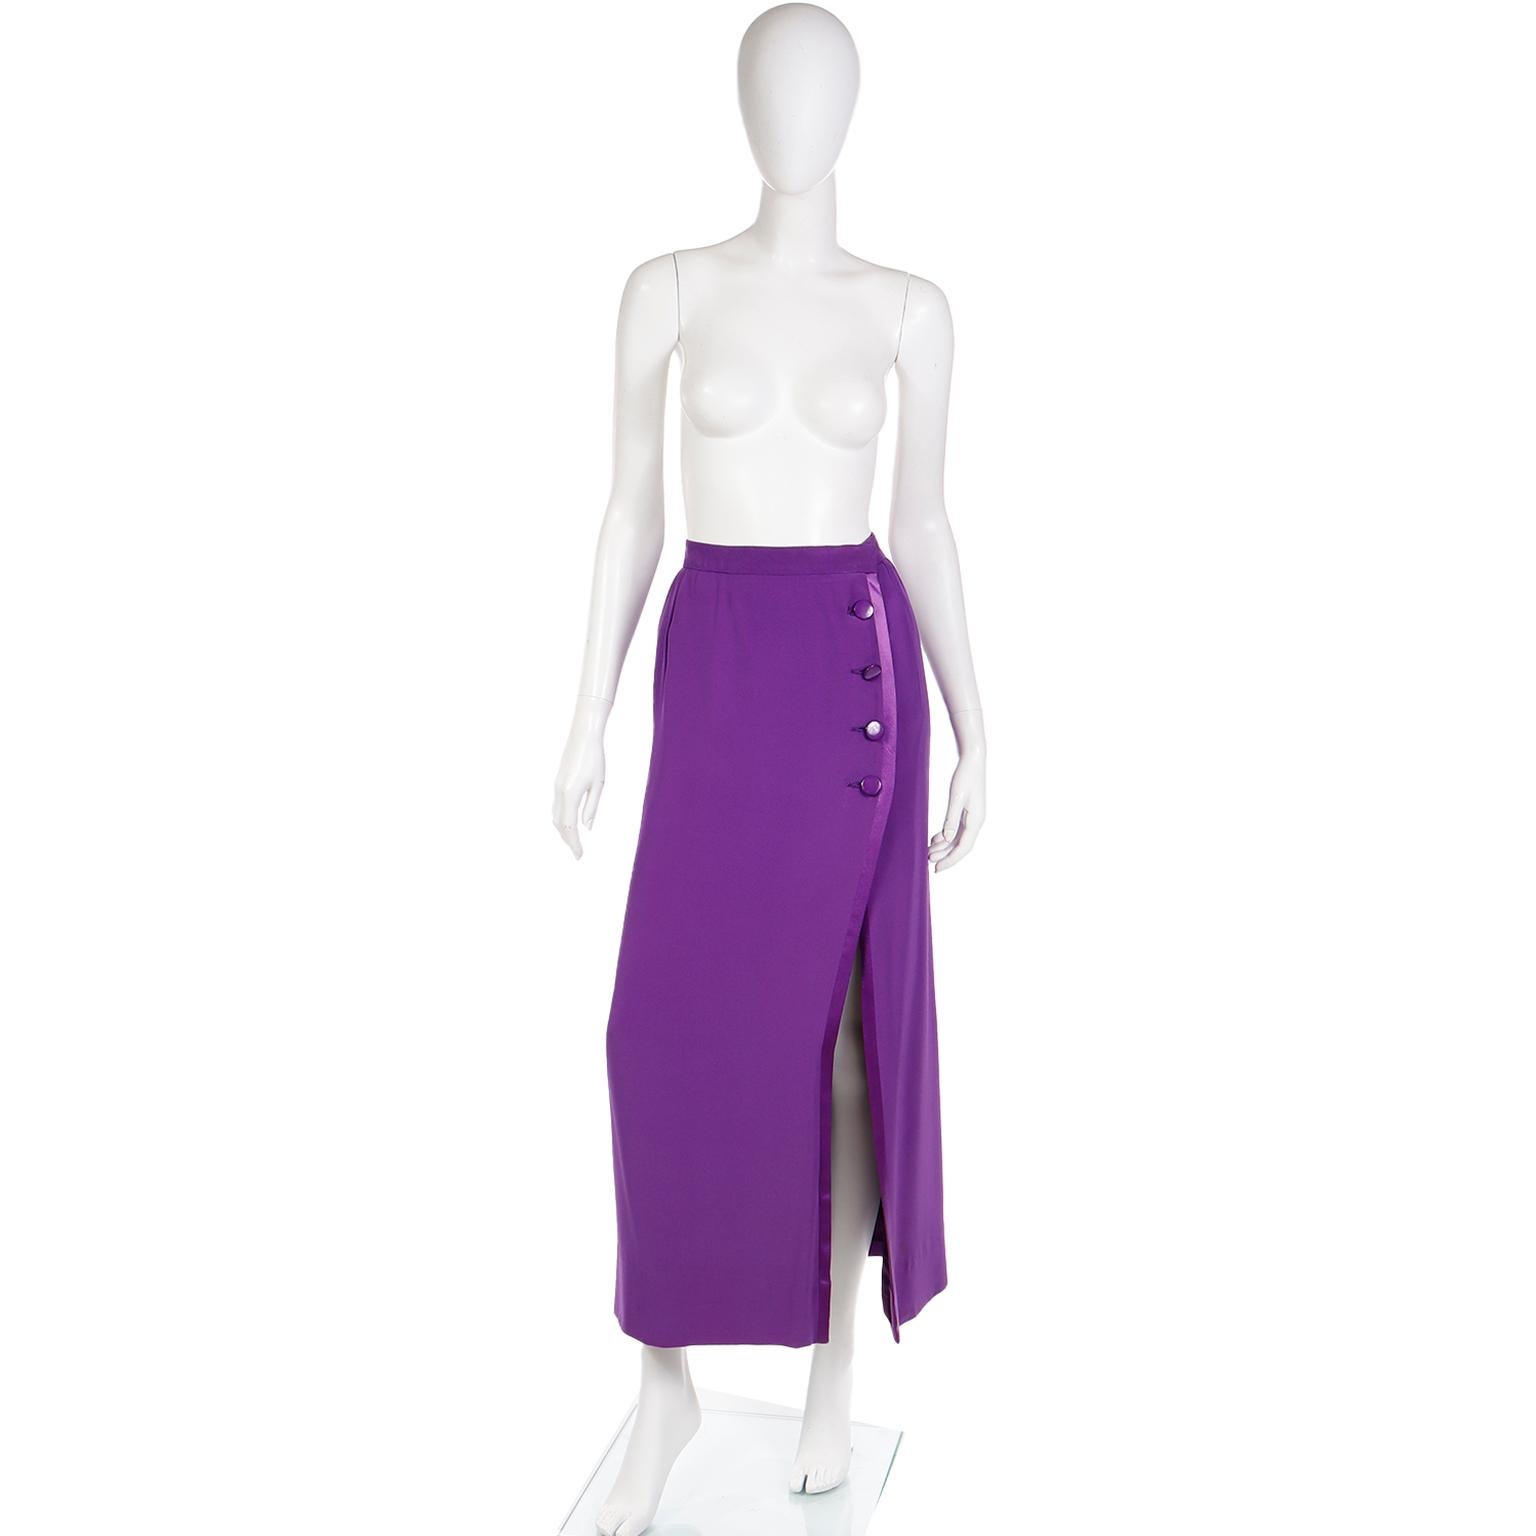 This is a wonderful 1990's vintage Yves Saint Laurent Rive Gauche long skirt in a luxurious purple wool crepe. This great skirt can be worn with a silk top or cropped jacket for an evening out.The skirt is fully lined in dark purple satin and has